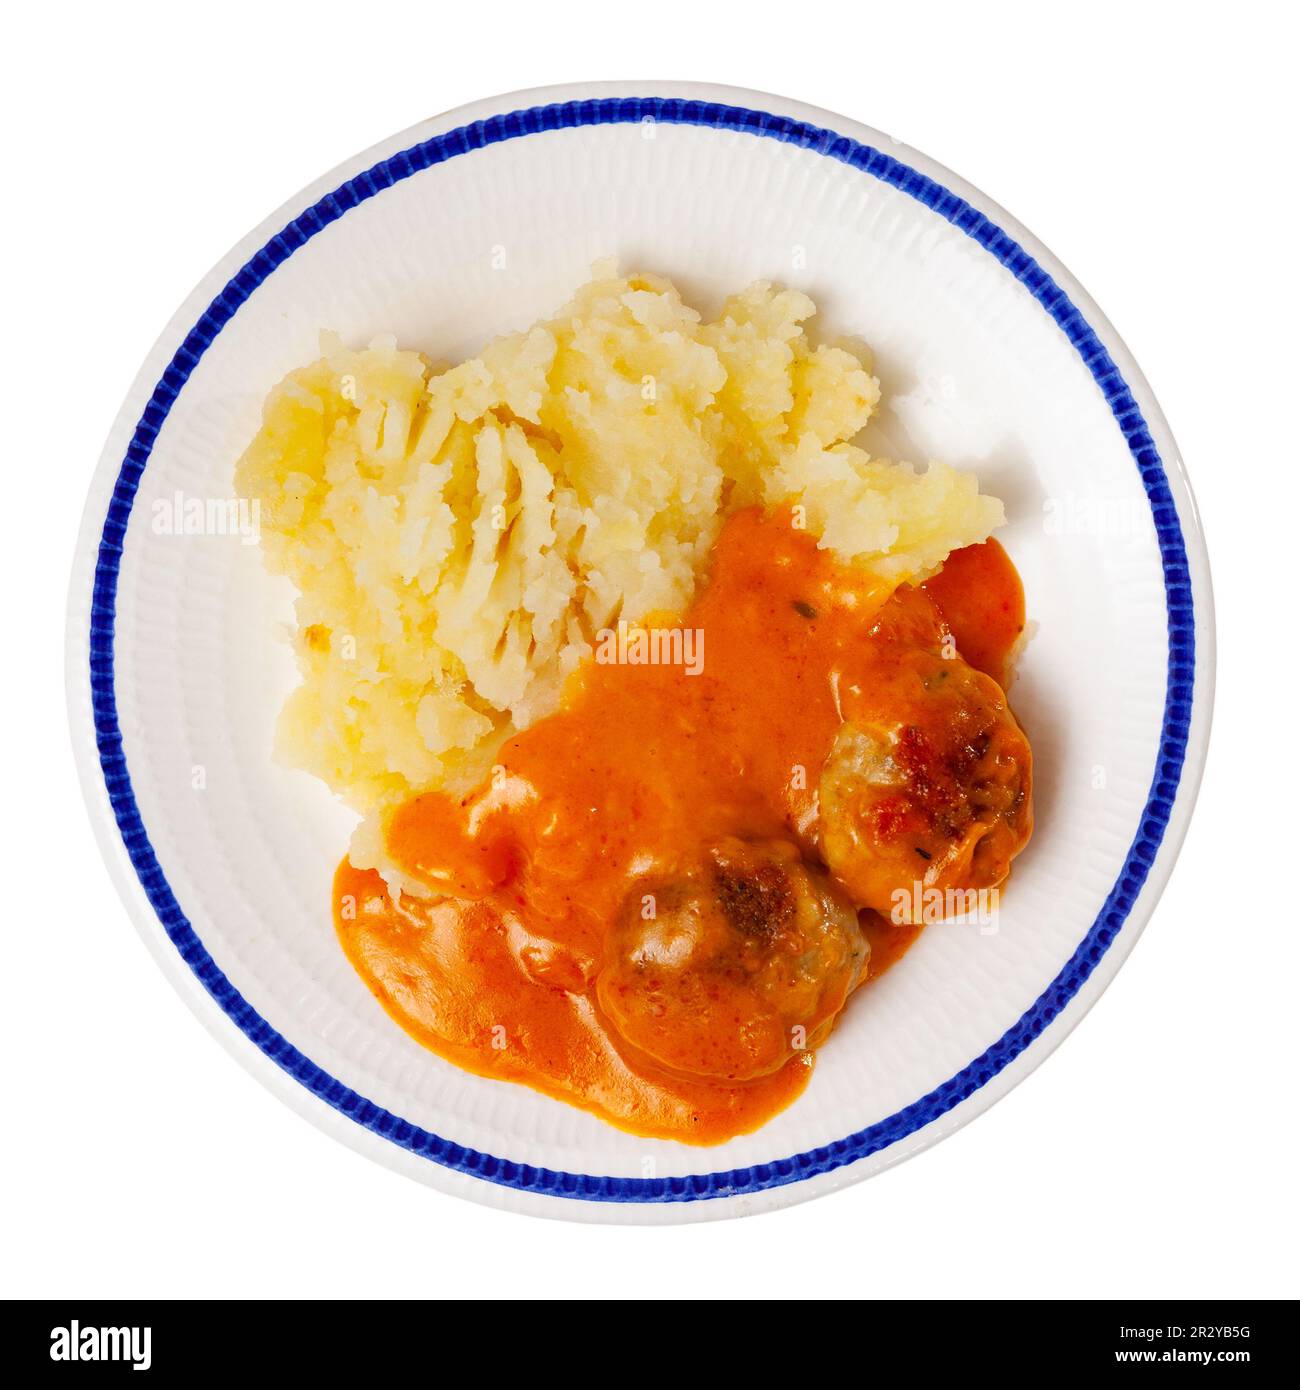 Meatballs in sauce served with mashed potatoes Stock Photo